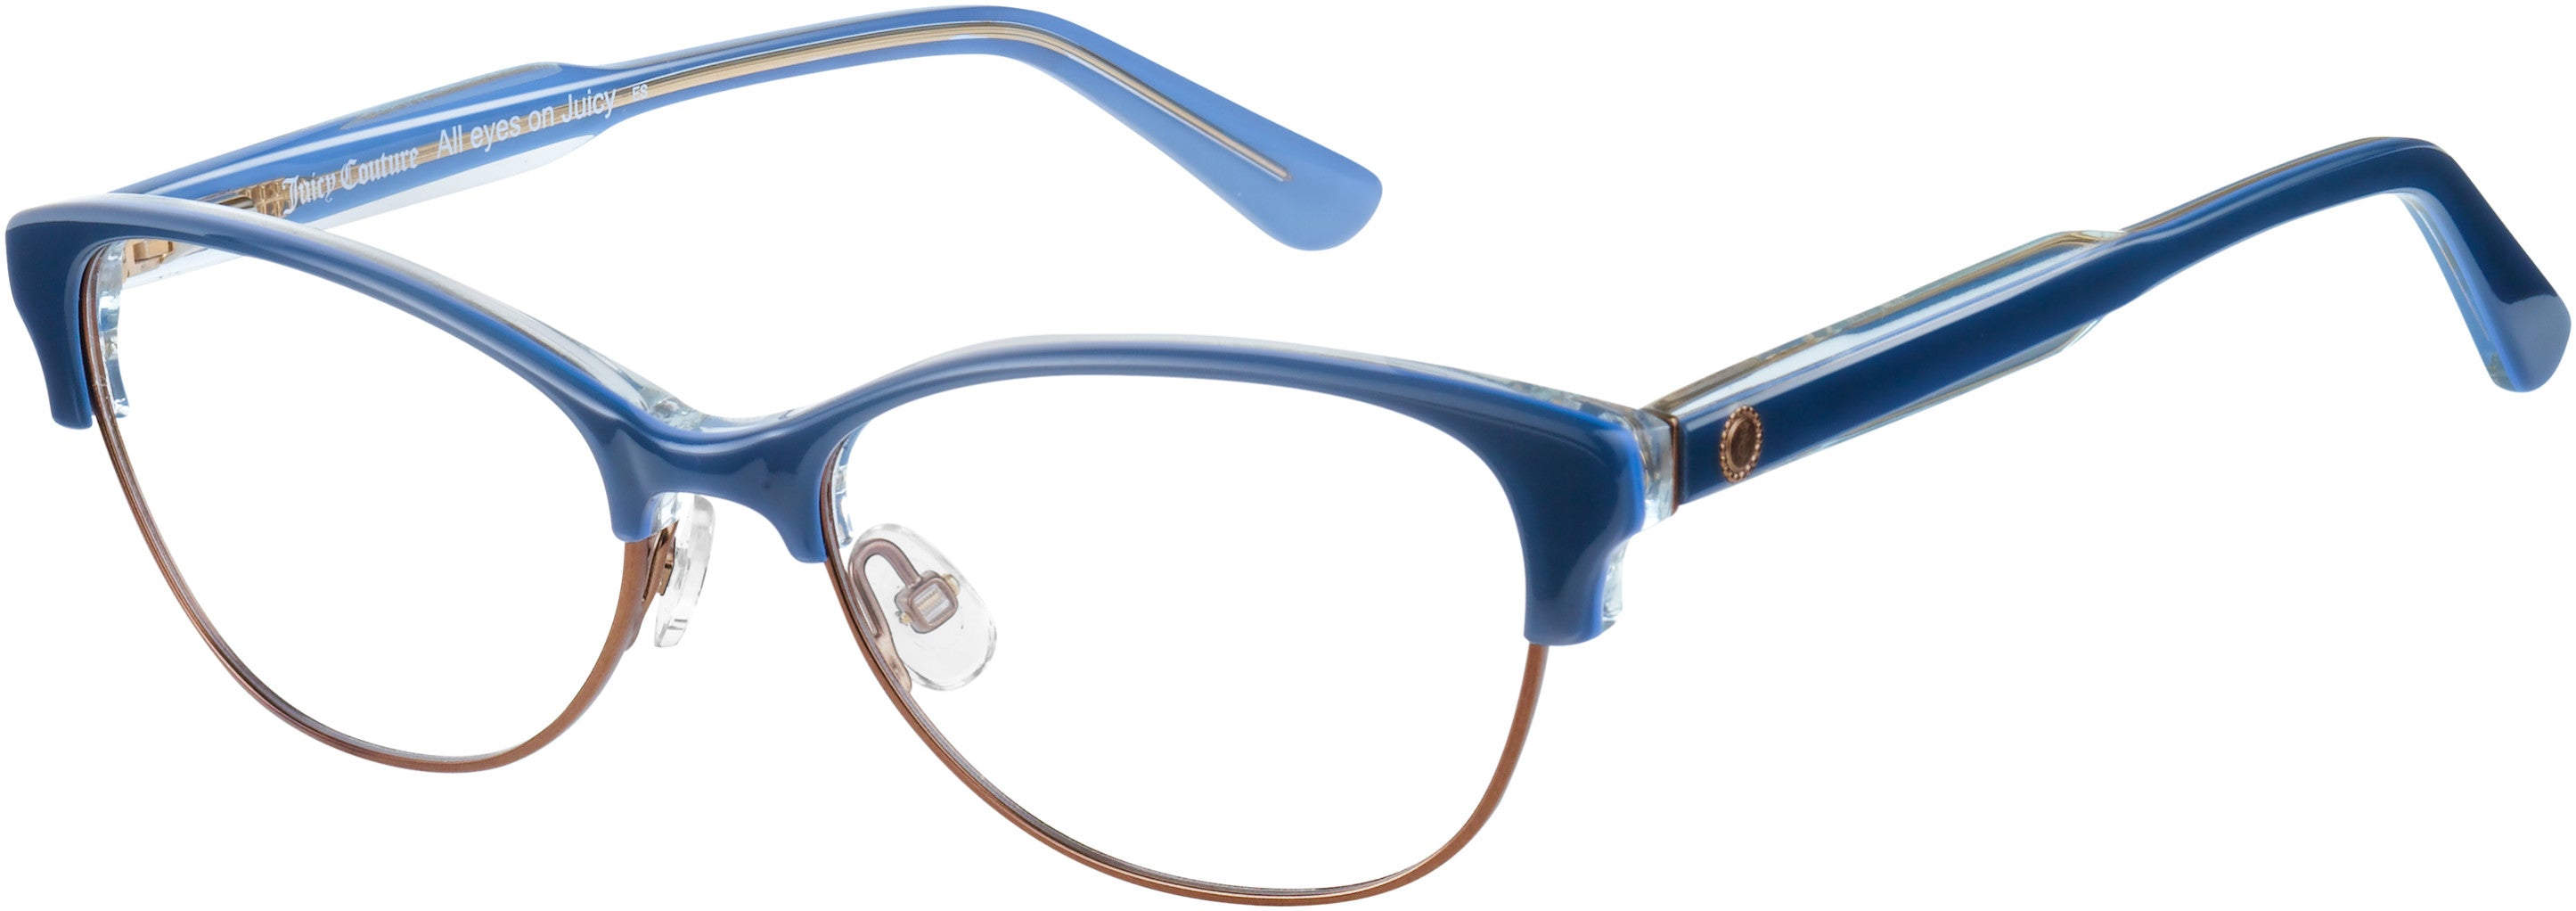 Juicy Couture Juicy 174 Oval Modified Eyeglasses 0OXZ-0OXZ  Blue Crystal (00 Demo Lens)